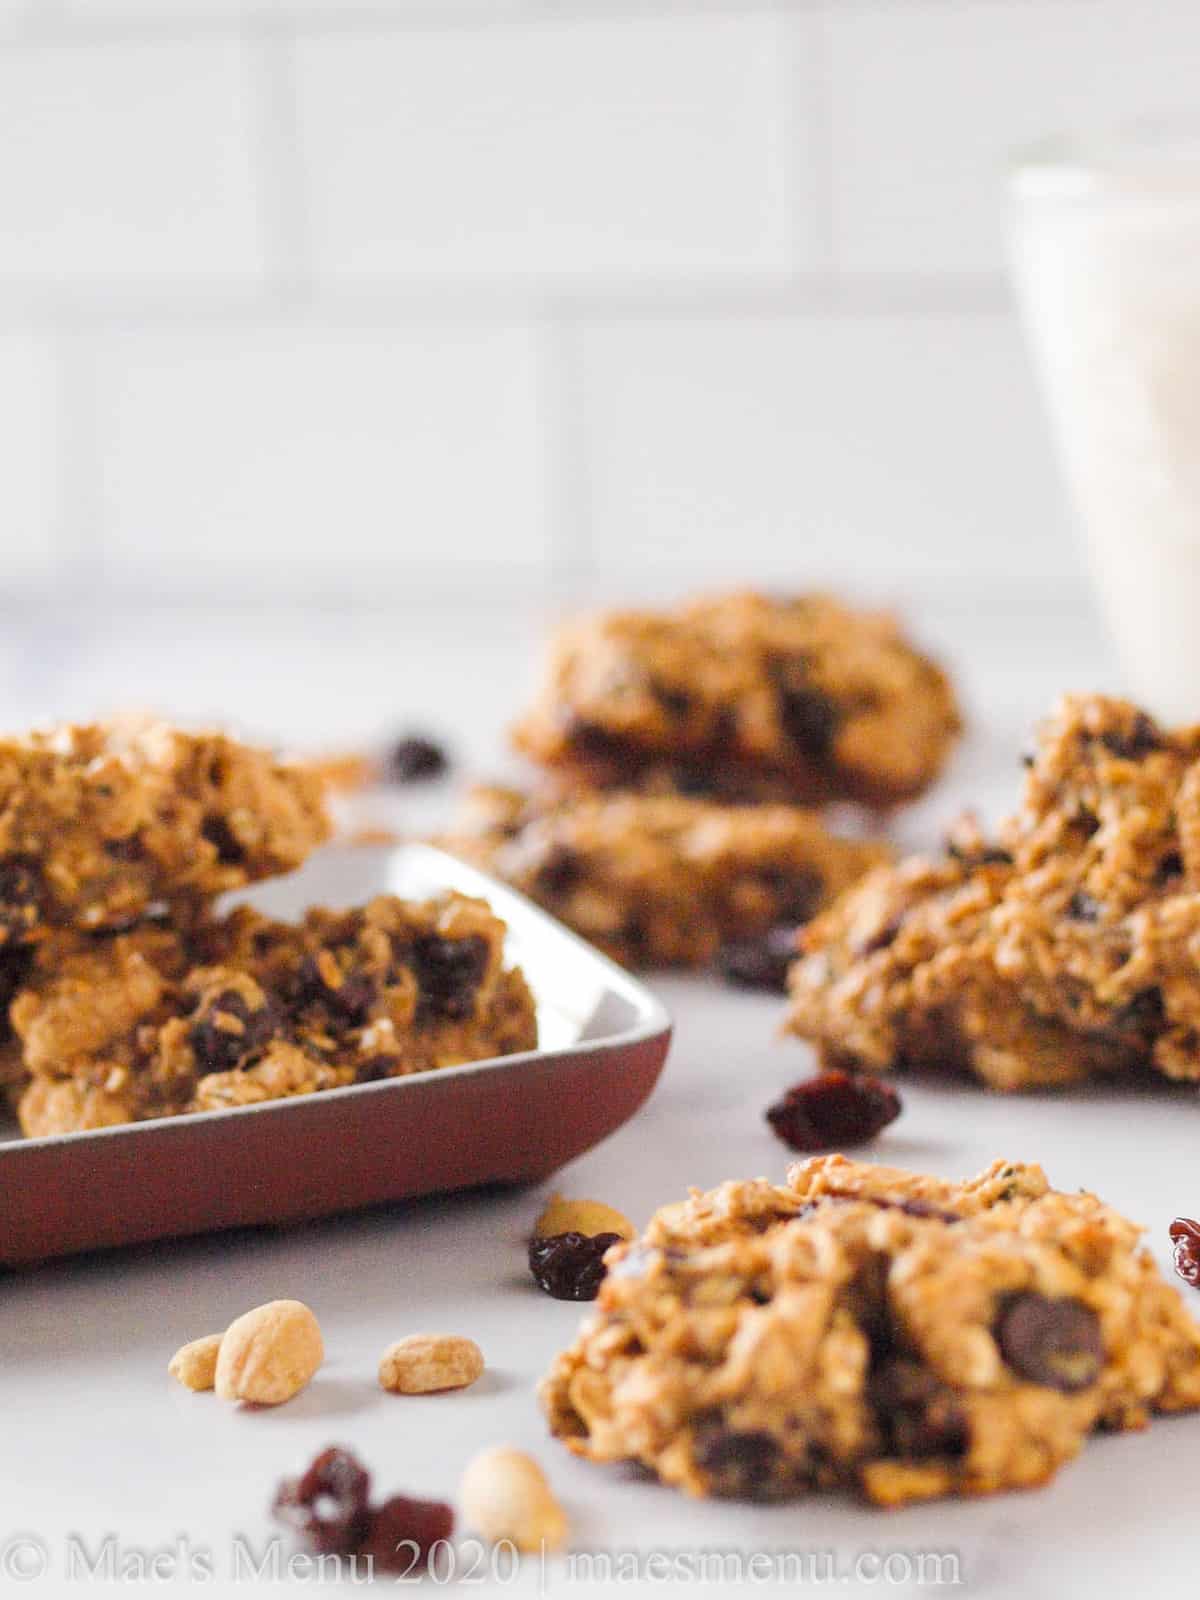 Oatmeal breakfast cookies on a table next to a small plate of cookies, raisins, and peanuts. 